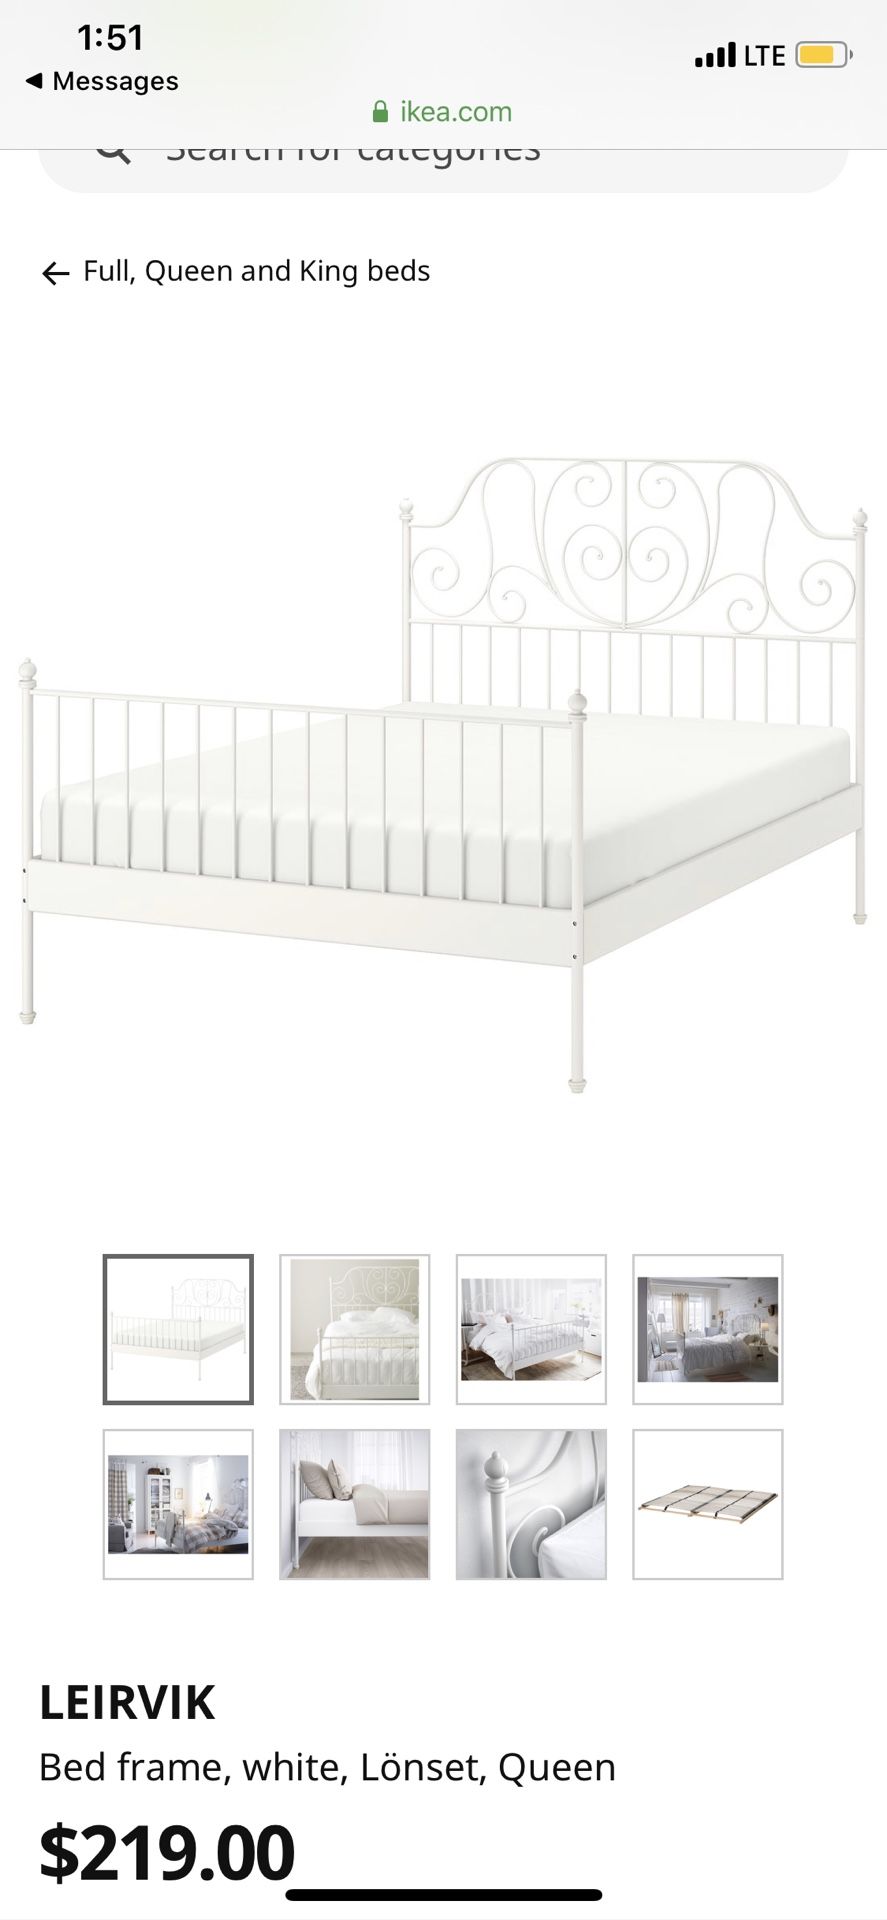 Queen Size Bed Frame ikea